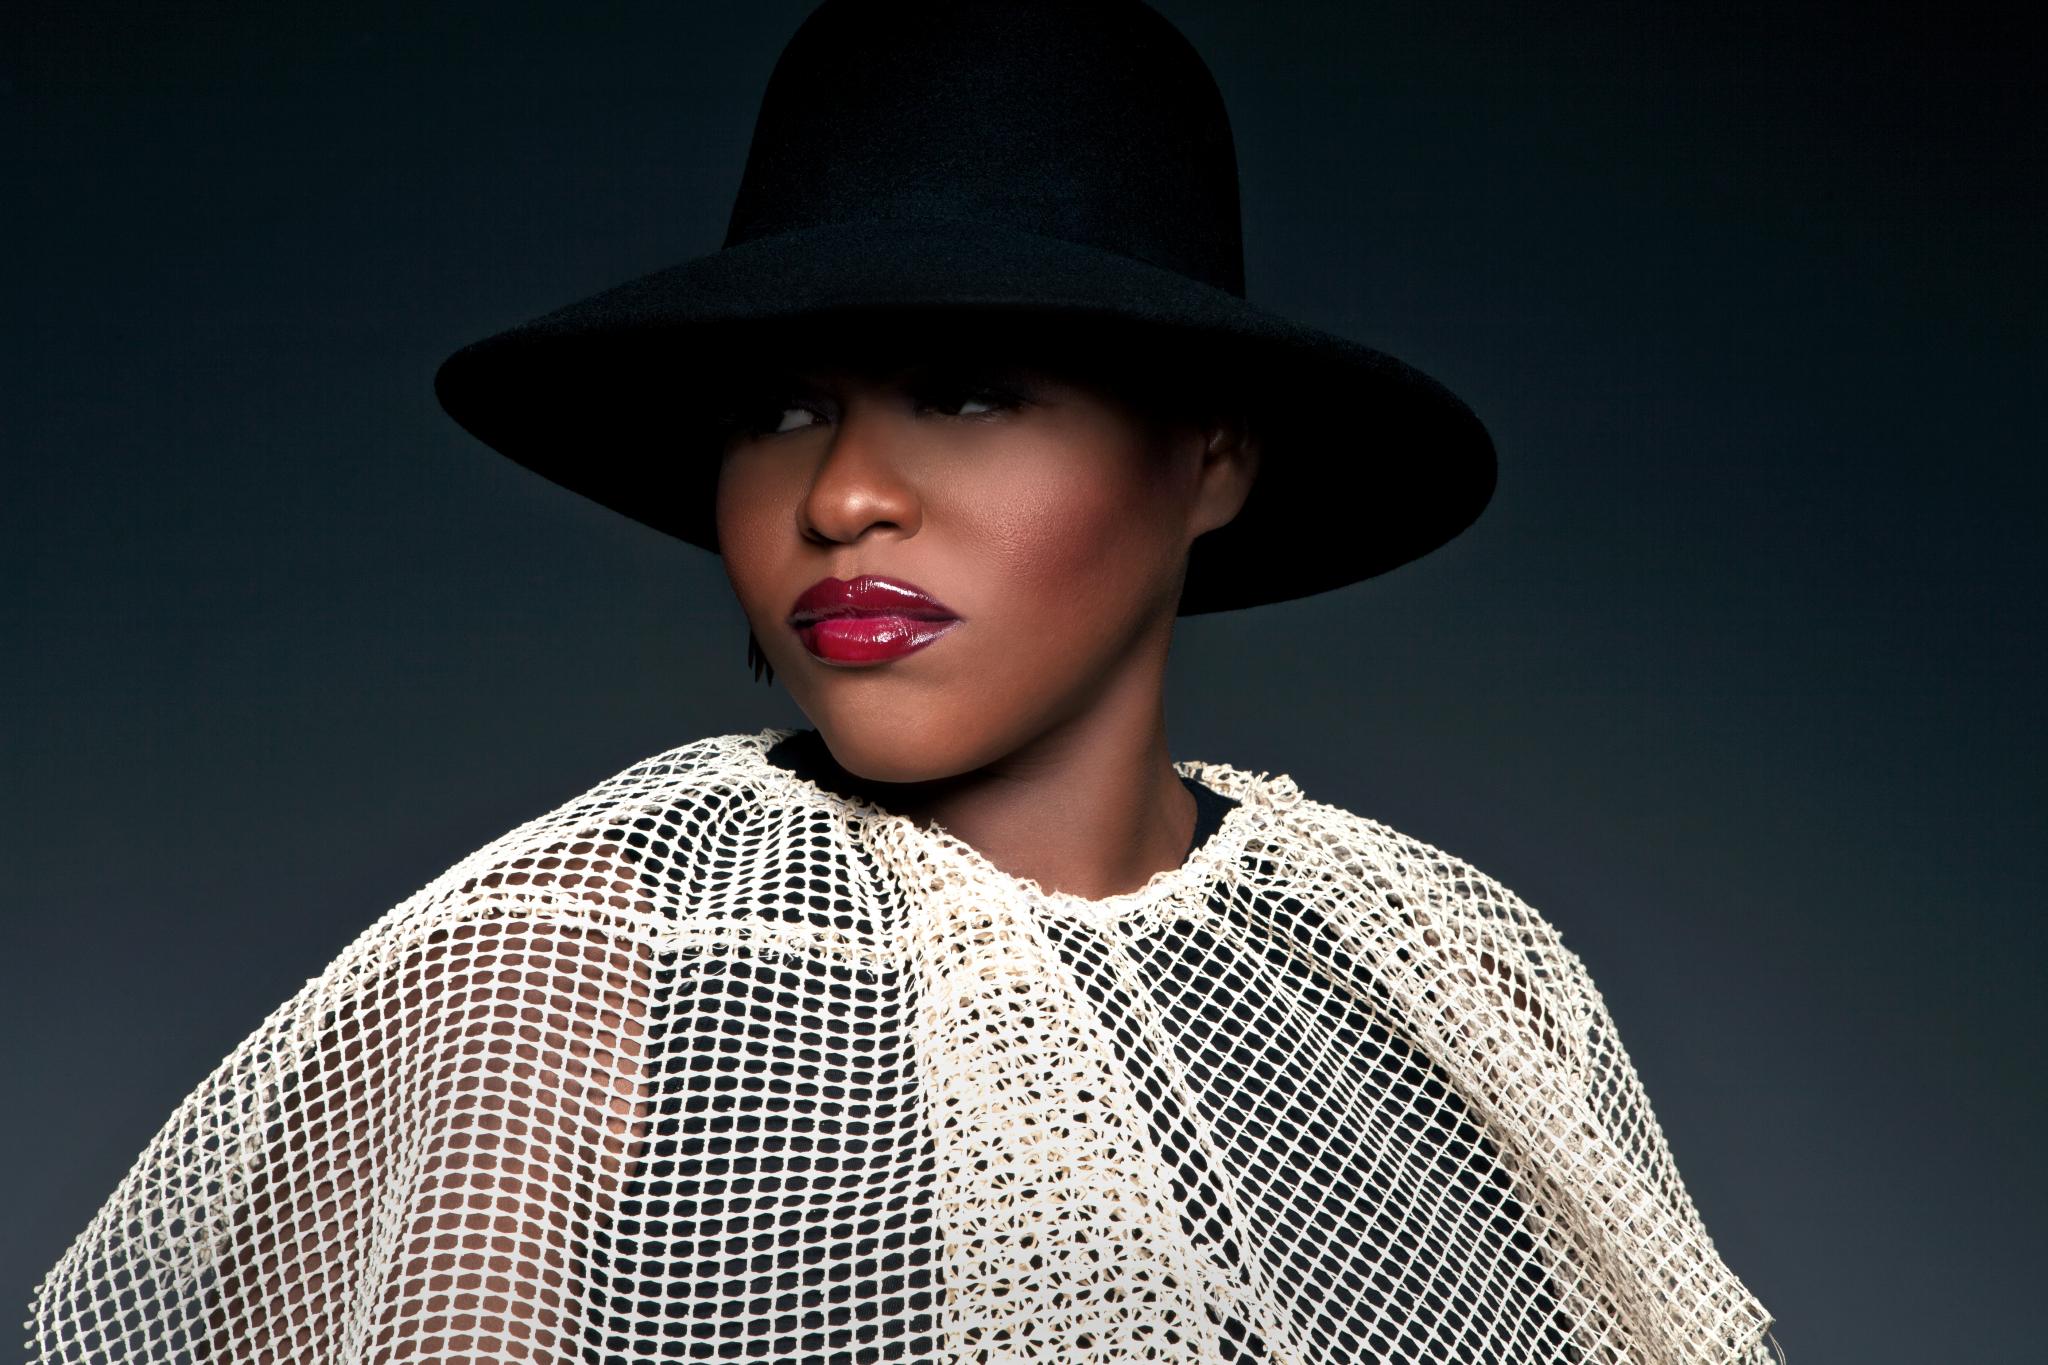 Soulful Singer Stacy Barthe Talks Love, Body Image and Being 'Beautifully Flawed'